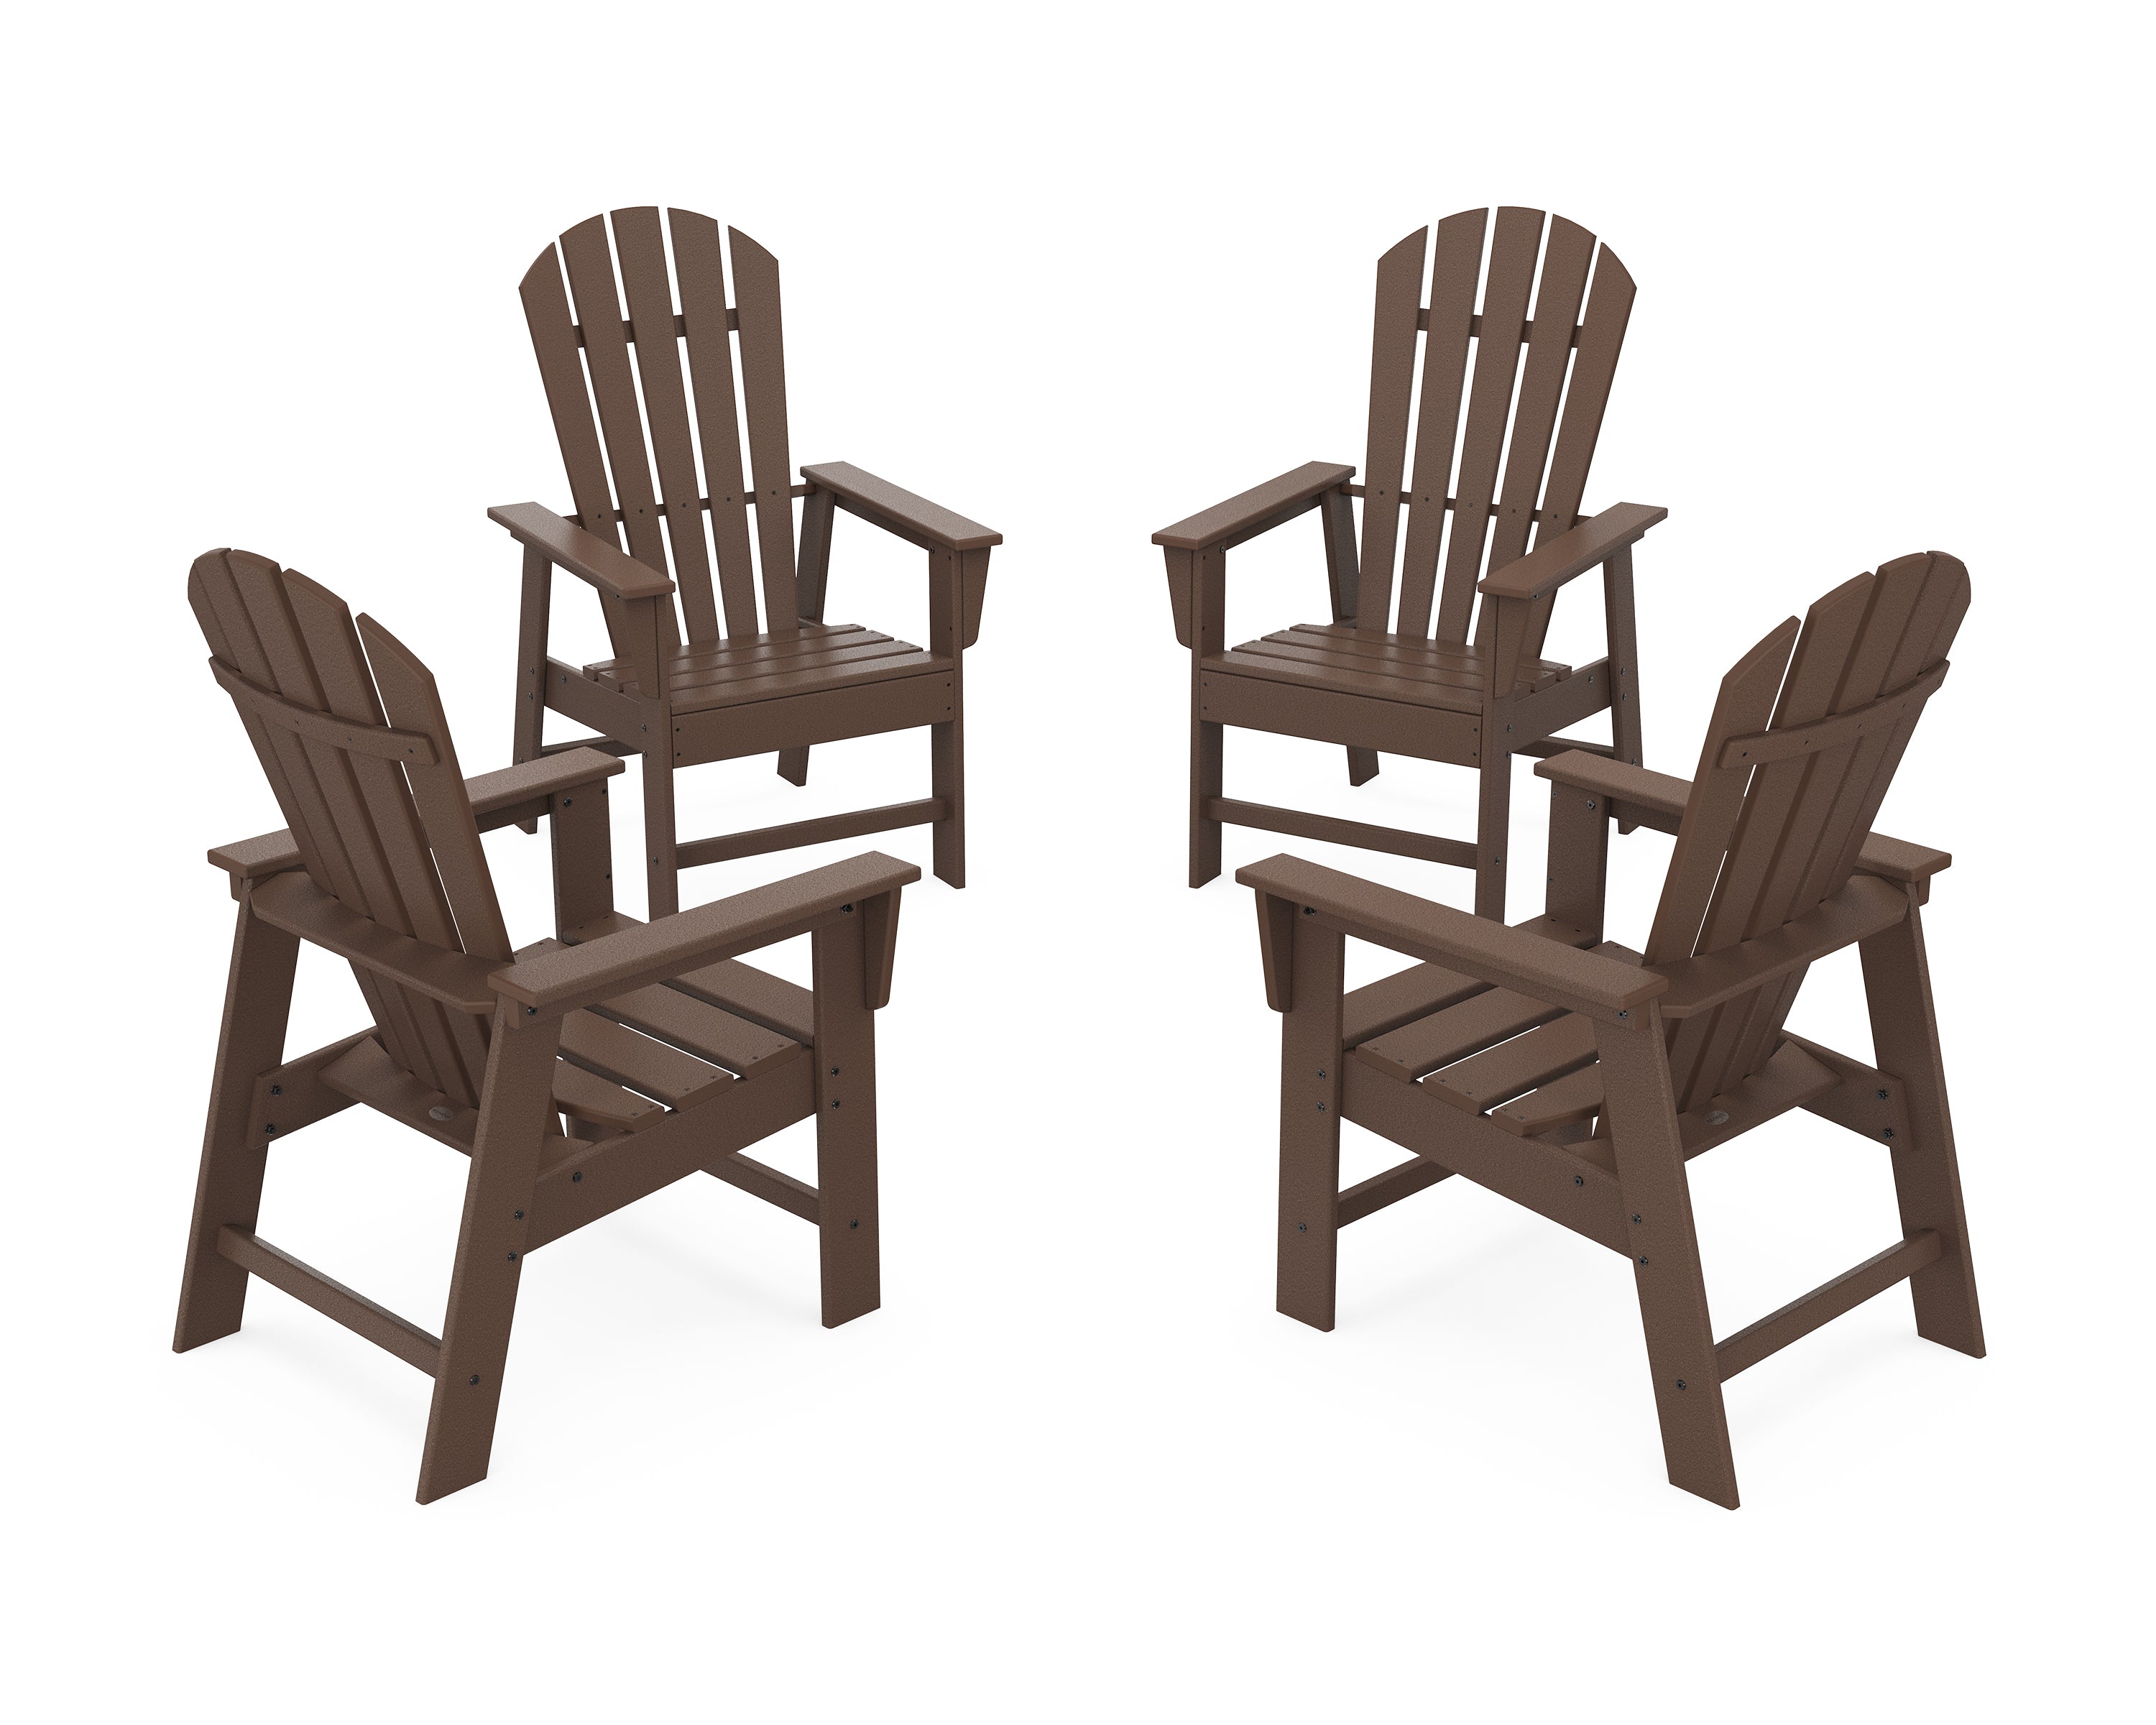 POLYWOOD® 4-Piece South Beach Casual Chair Conversation Set in Mahogany